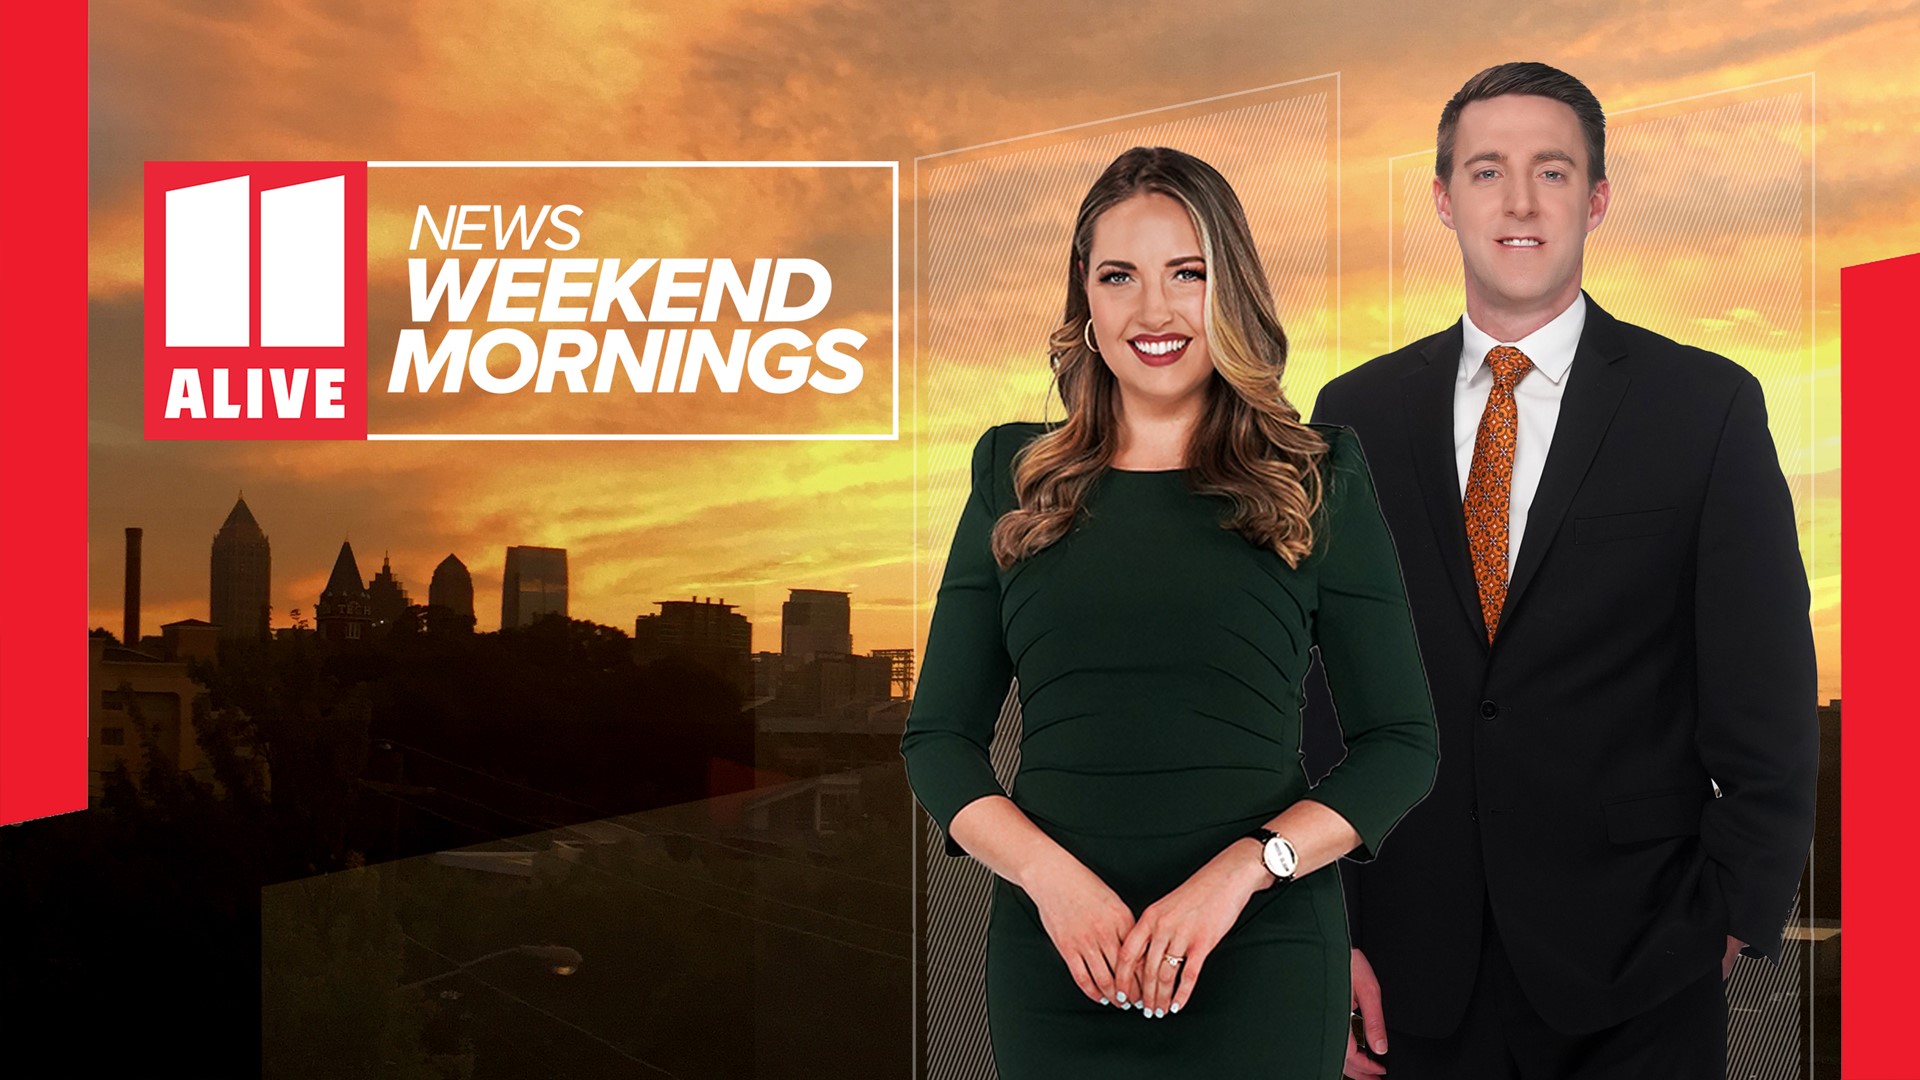 Watch the latest breaking news, weather, traffic and sports for metro Atlanta